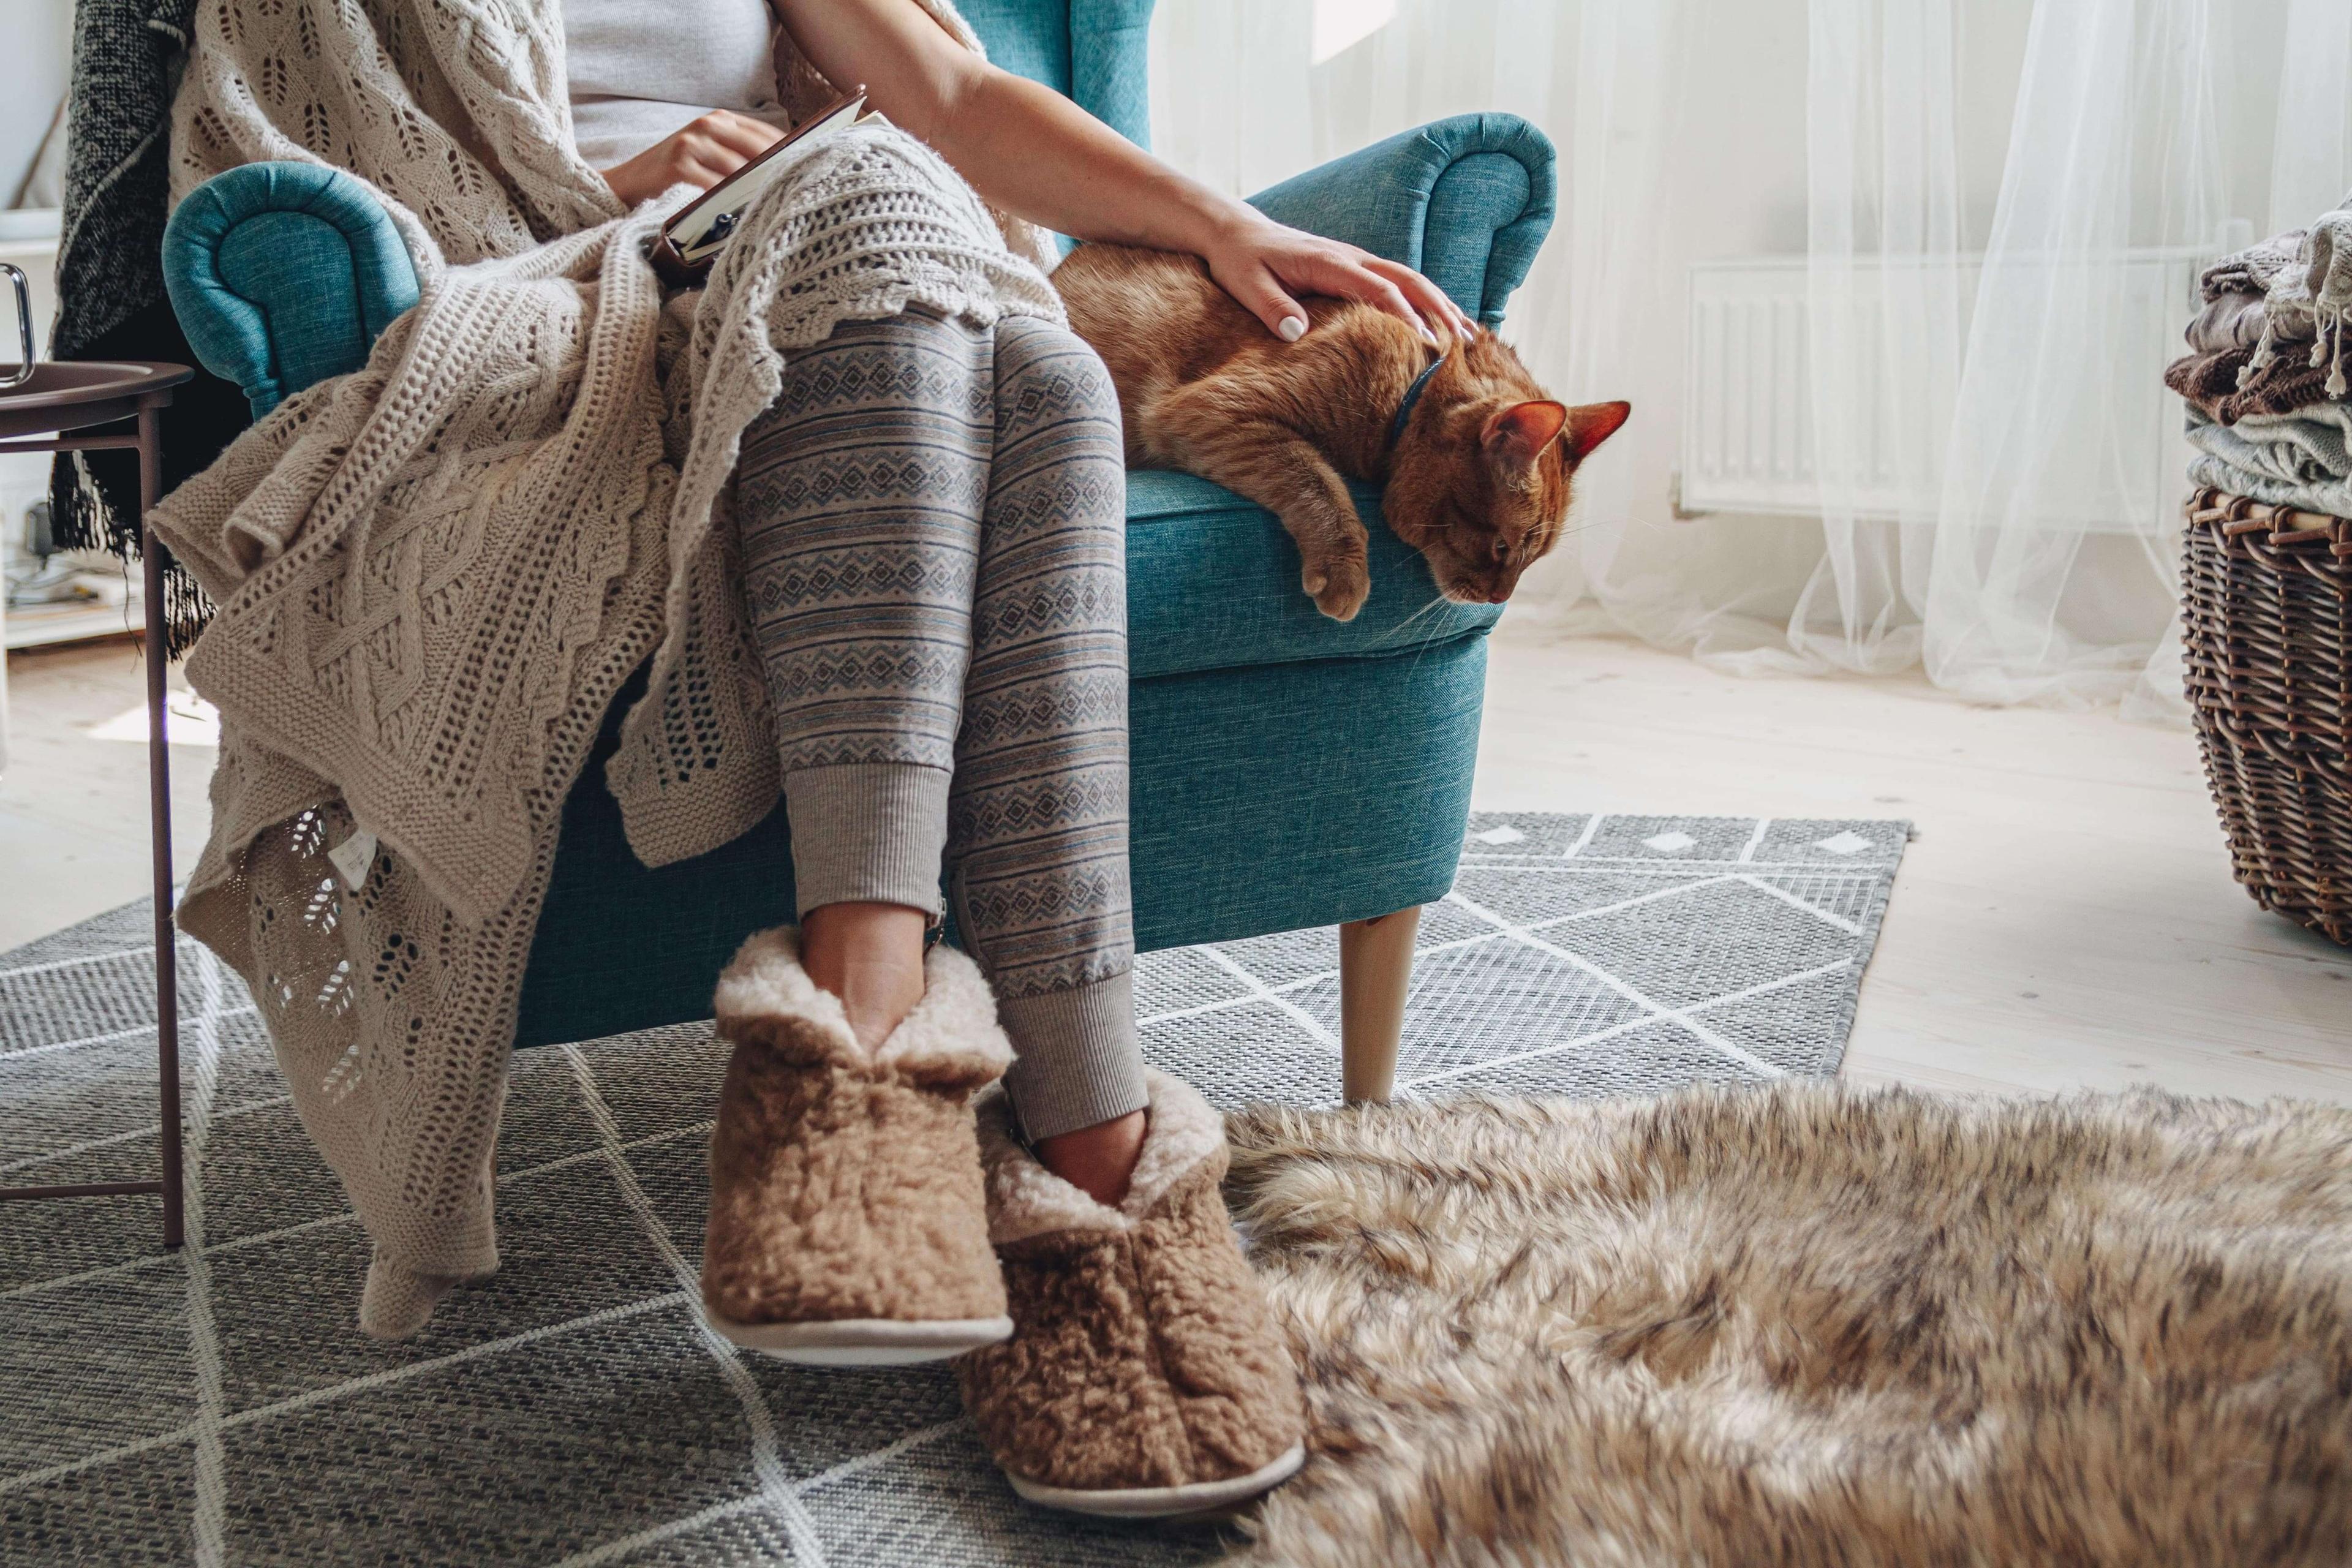 How to Keep Your Home Warm When It’s Chilly Outside